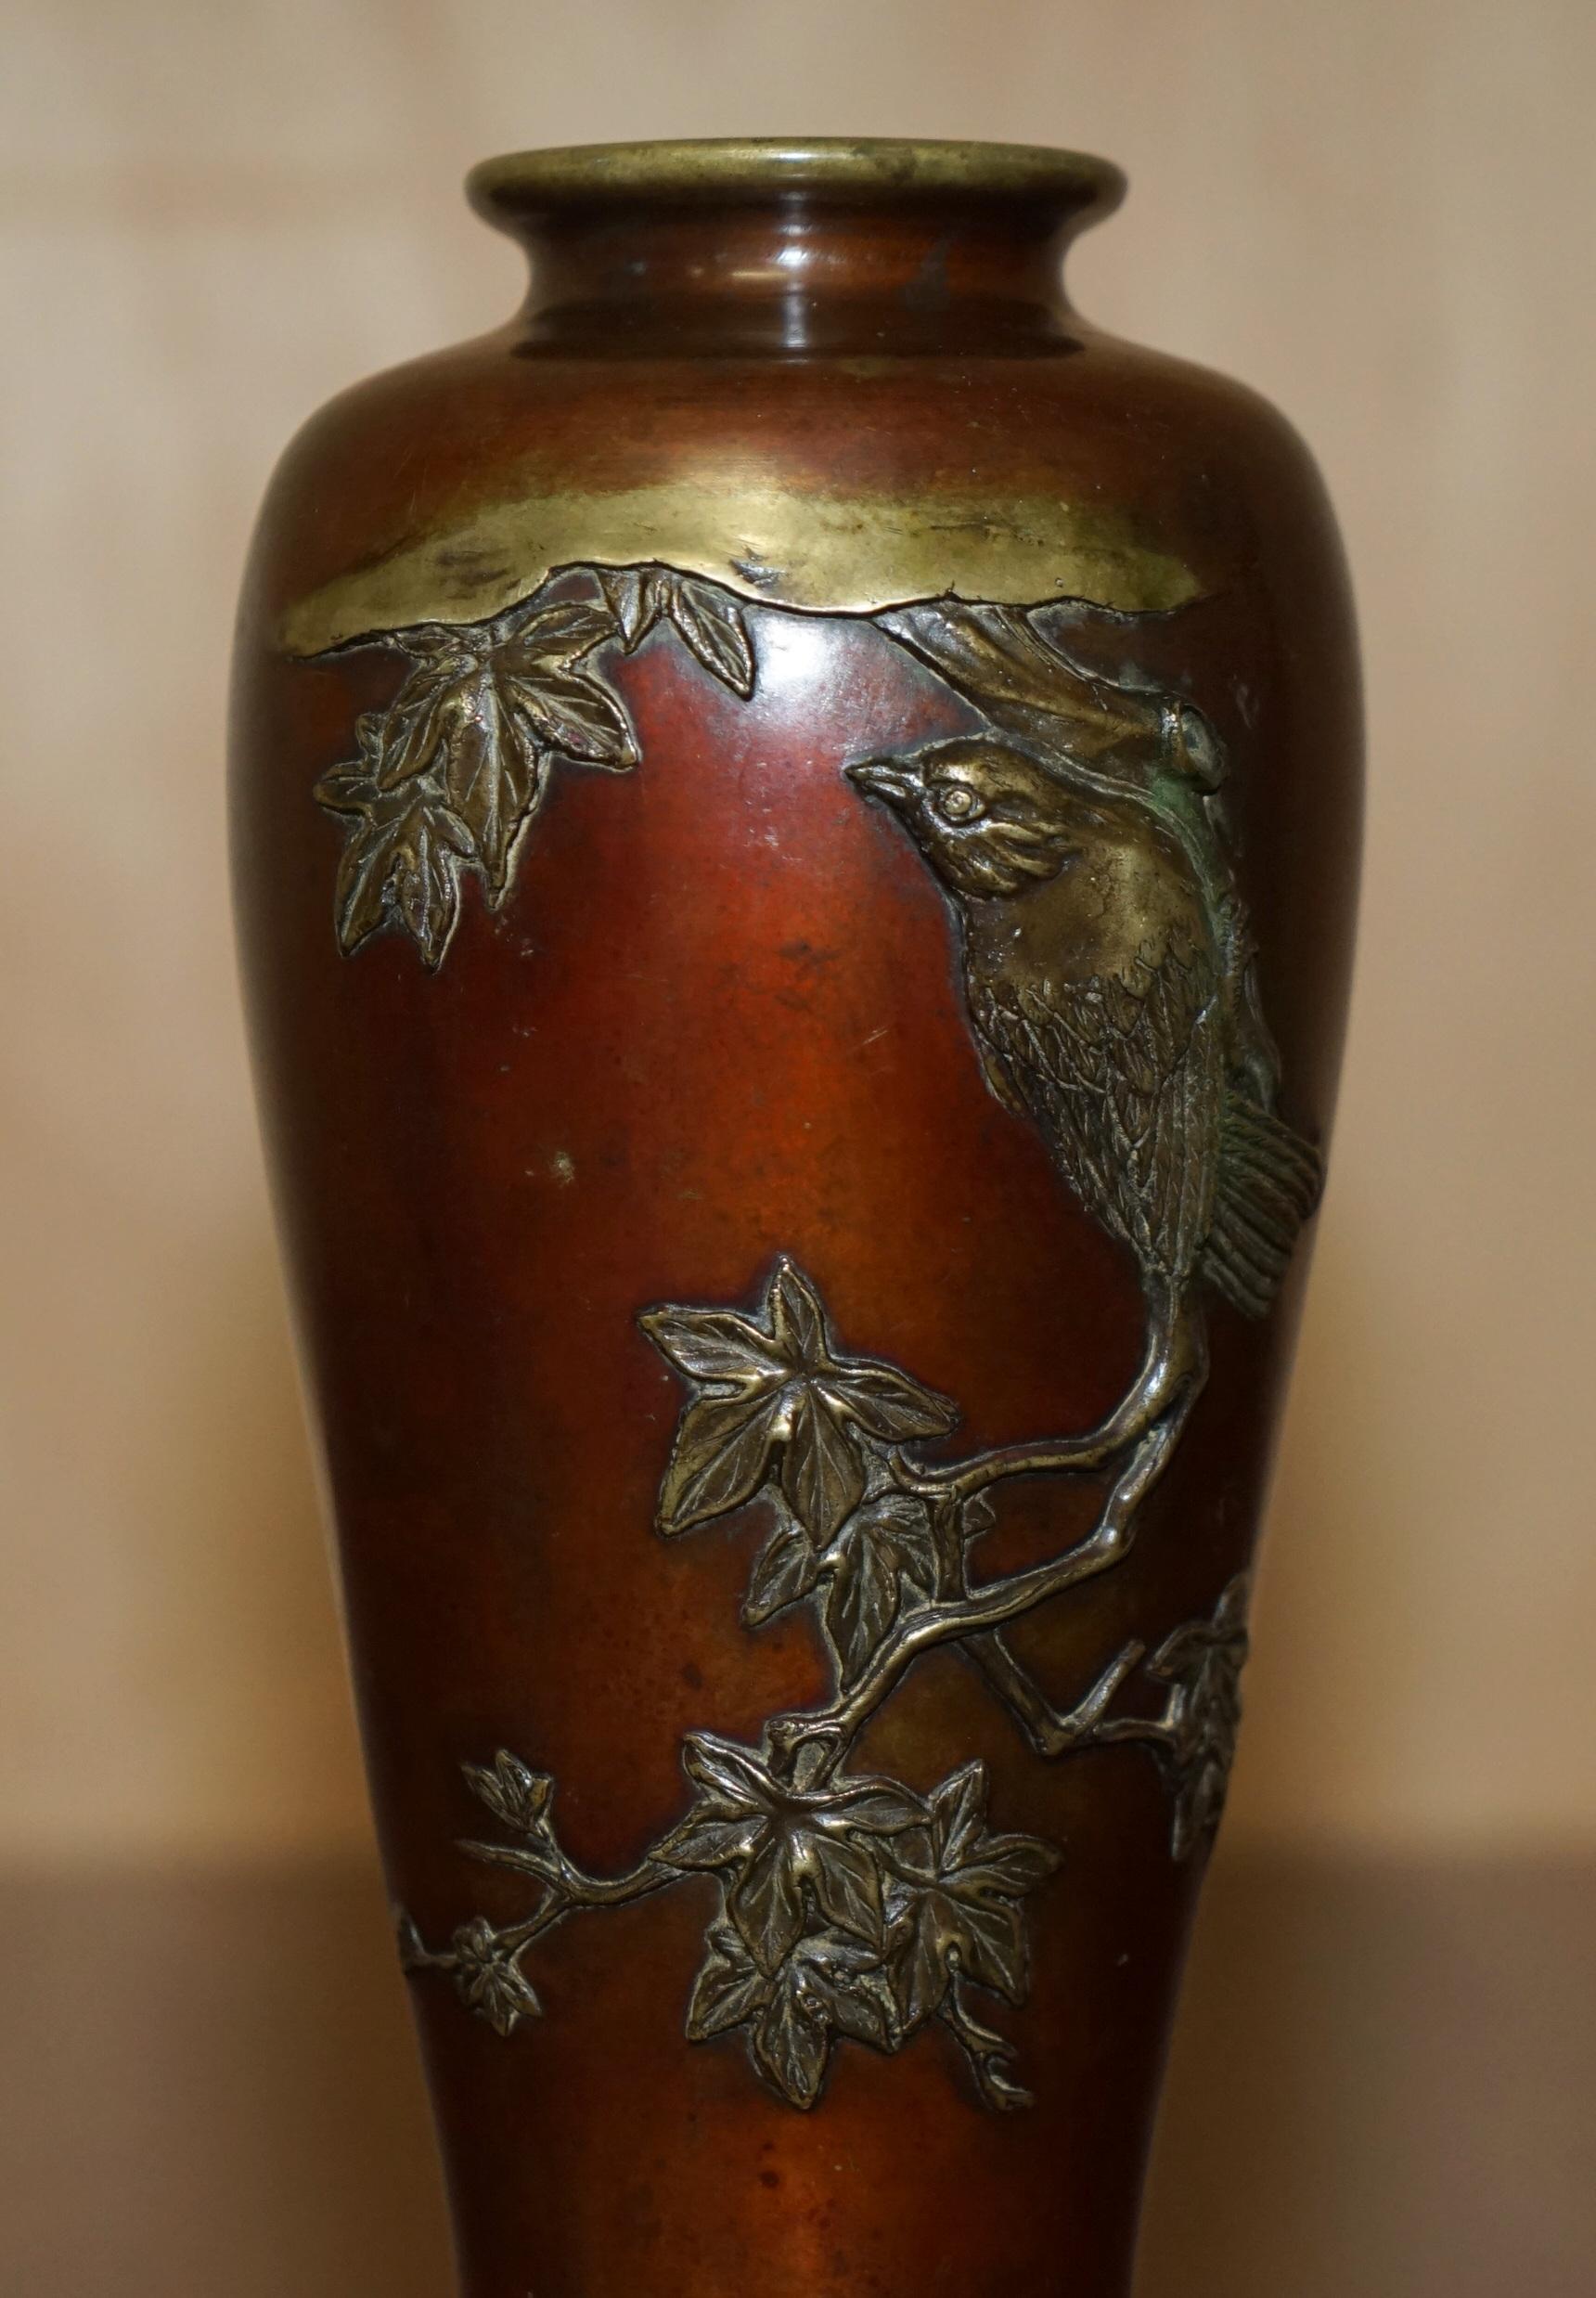 Royal House Antiques

Royal House Antiques is delighted to offer for sale this absolutely stunning circa 1870 signed to the base solid bronze Japanese bronze vase depicting a large bird on a branch

A wonderfully original find, this isn’t one of the